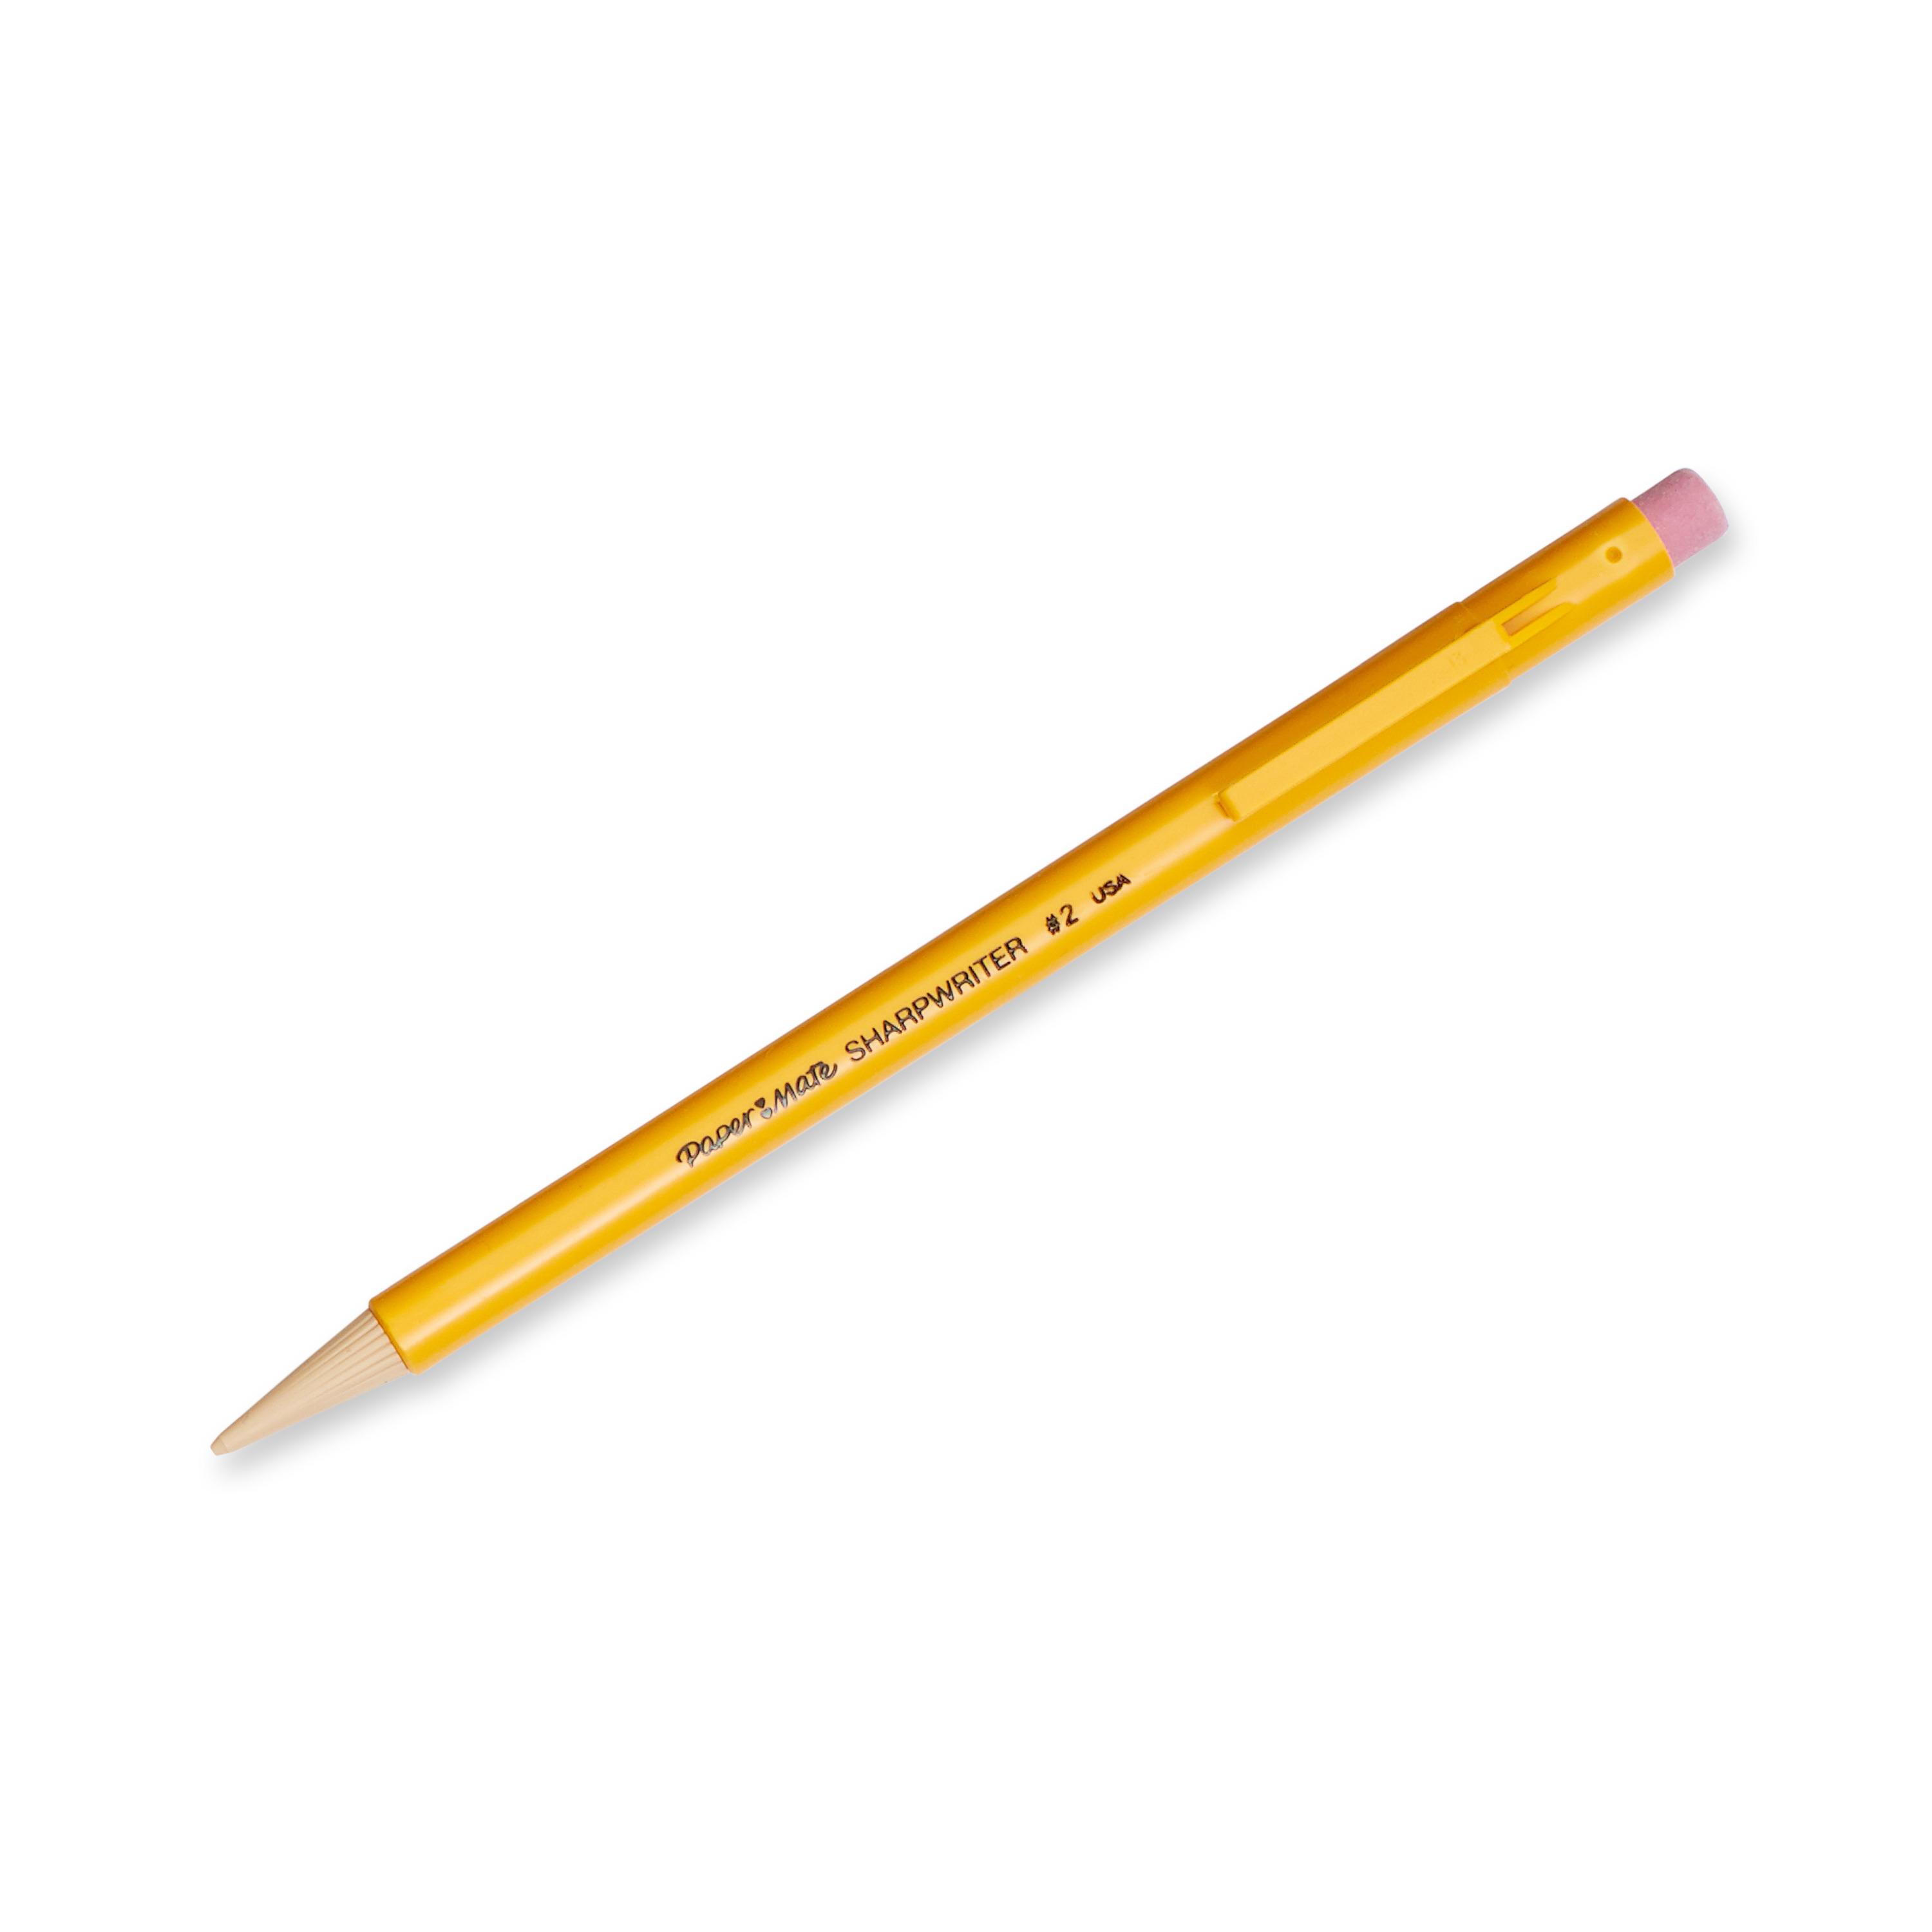 <b>   Versatile #2 Lead and Smudge-Resistant Eraser   </b></br> Featuring #2 lead, these pencils are an ideal choice for standardized tests, note-taking, and a variety of other writing tasks. The smudge-resistant eraser quickly and thoroughly takes care of mistakes, so you can make sure your documents look clean. 